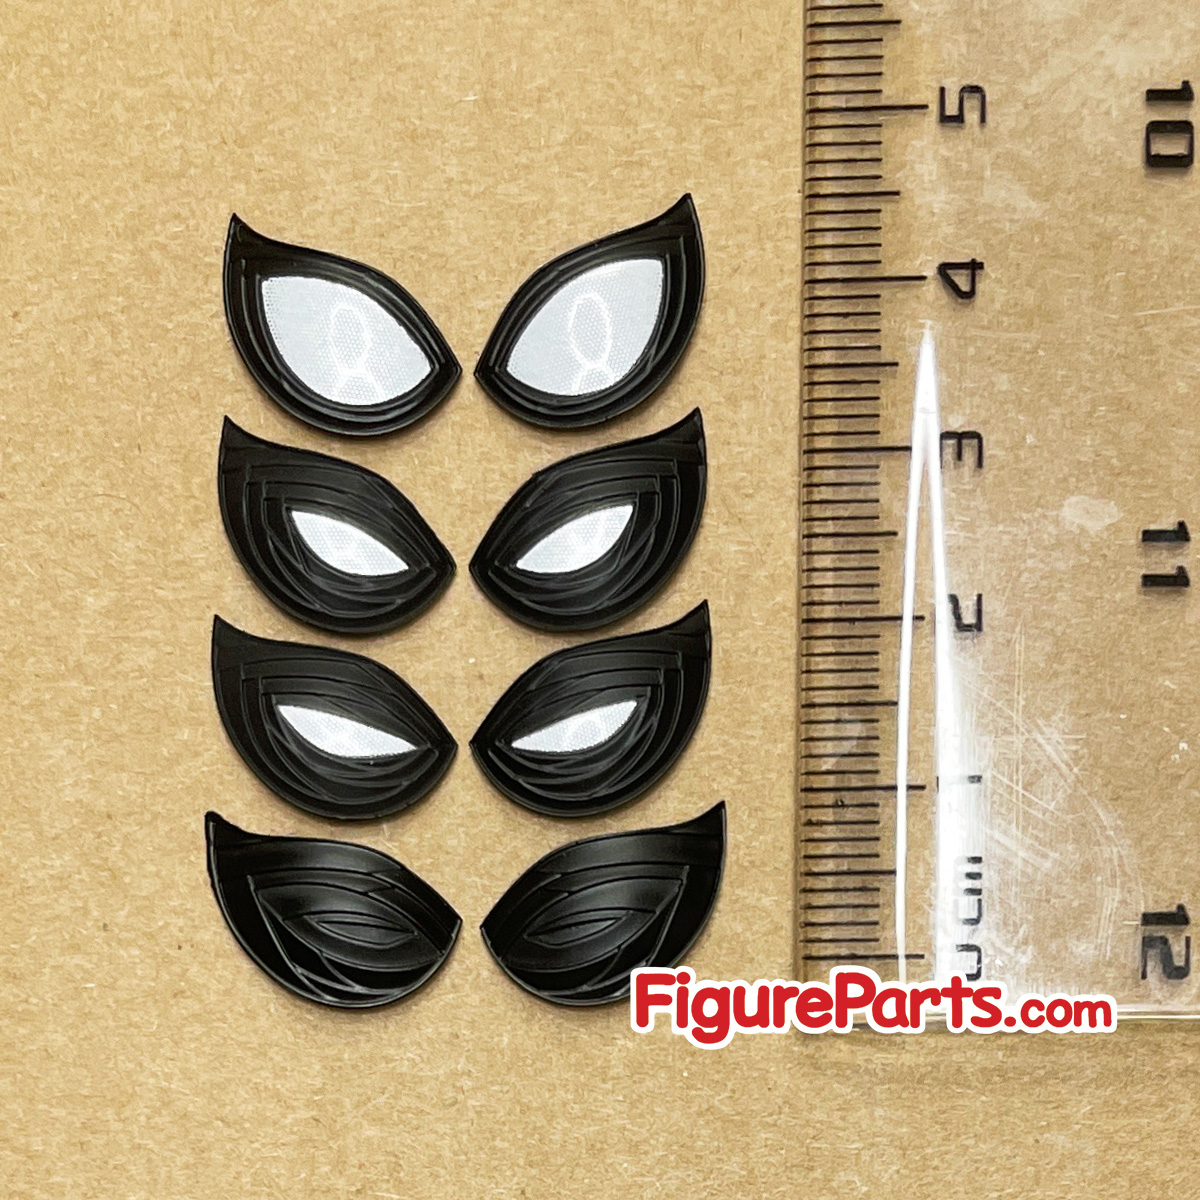 Masked Head Sculpt with Magnetic Eye Pieces - Hot Toys Spiderman Upgraded Suit Far From Home mms542 9